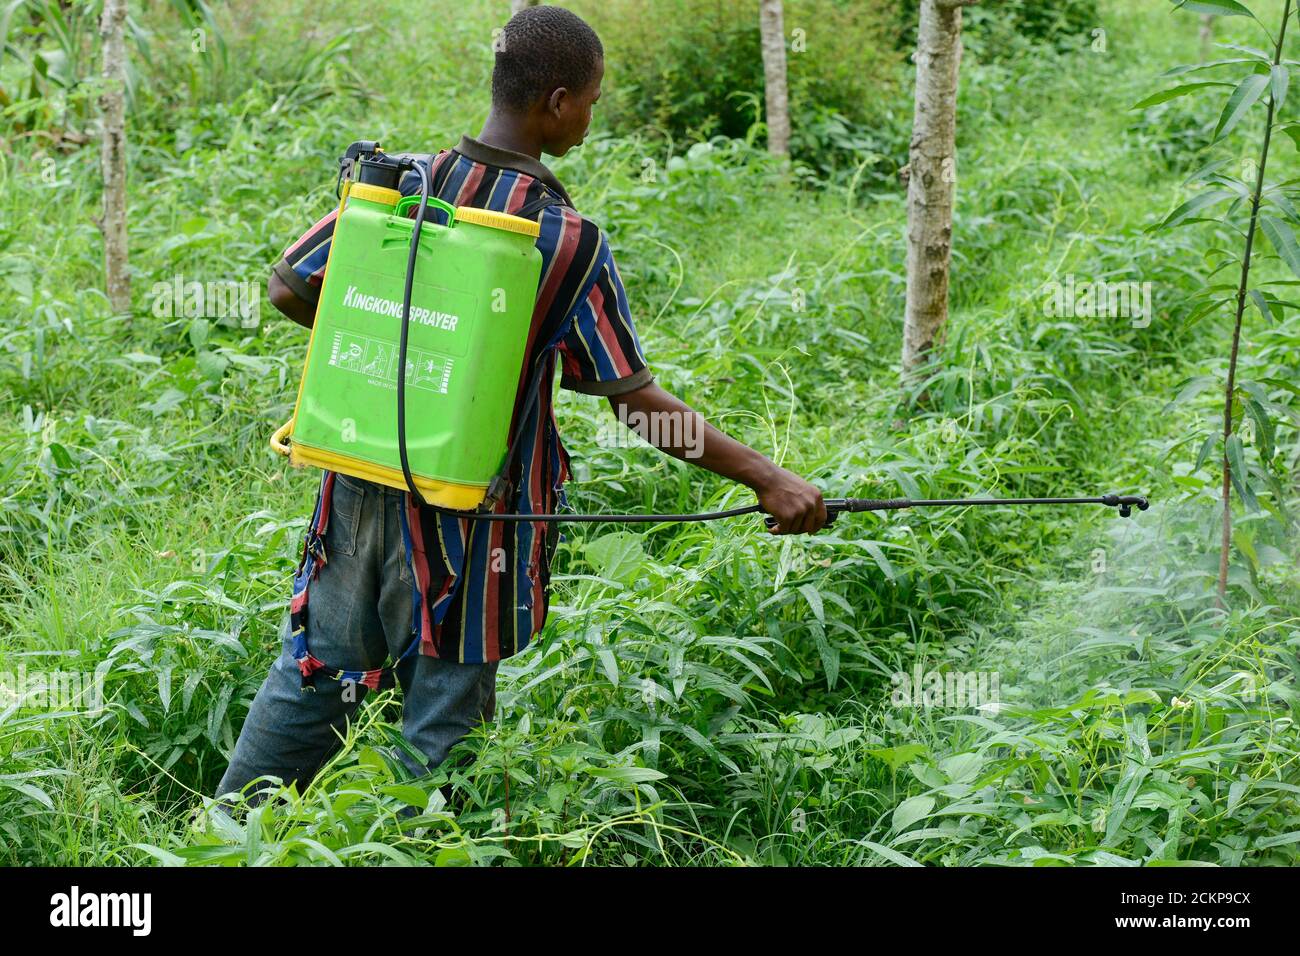 TOGO, Tohoun, village ADJIKAME, farmer spray Herbicide Glyphosate a round-up weed killer, made in china by RAINBOWCHEM,  without protective mask and clothes, in bean filed Stock Photo